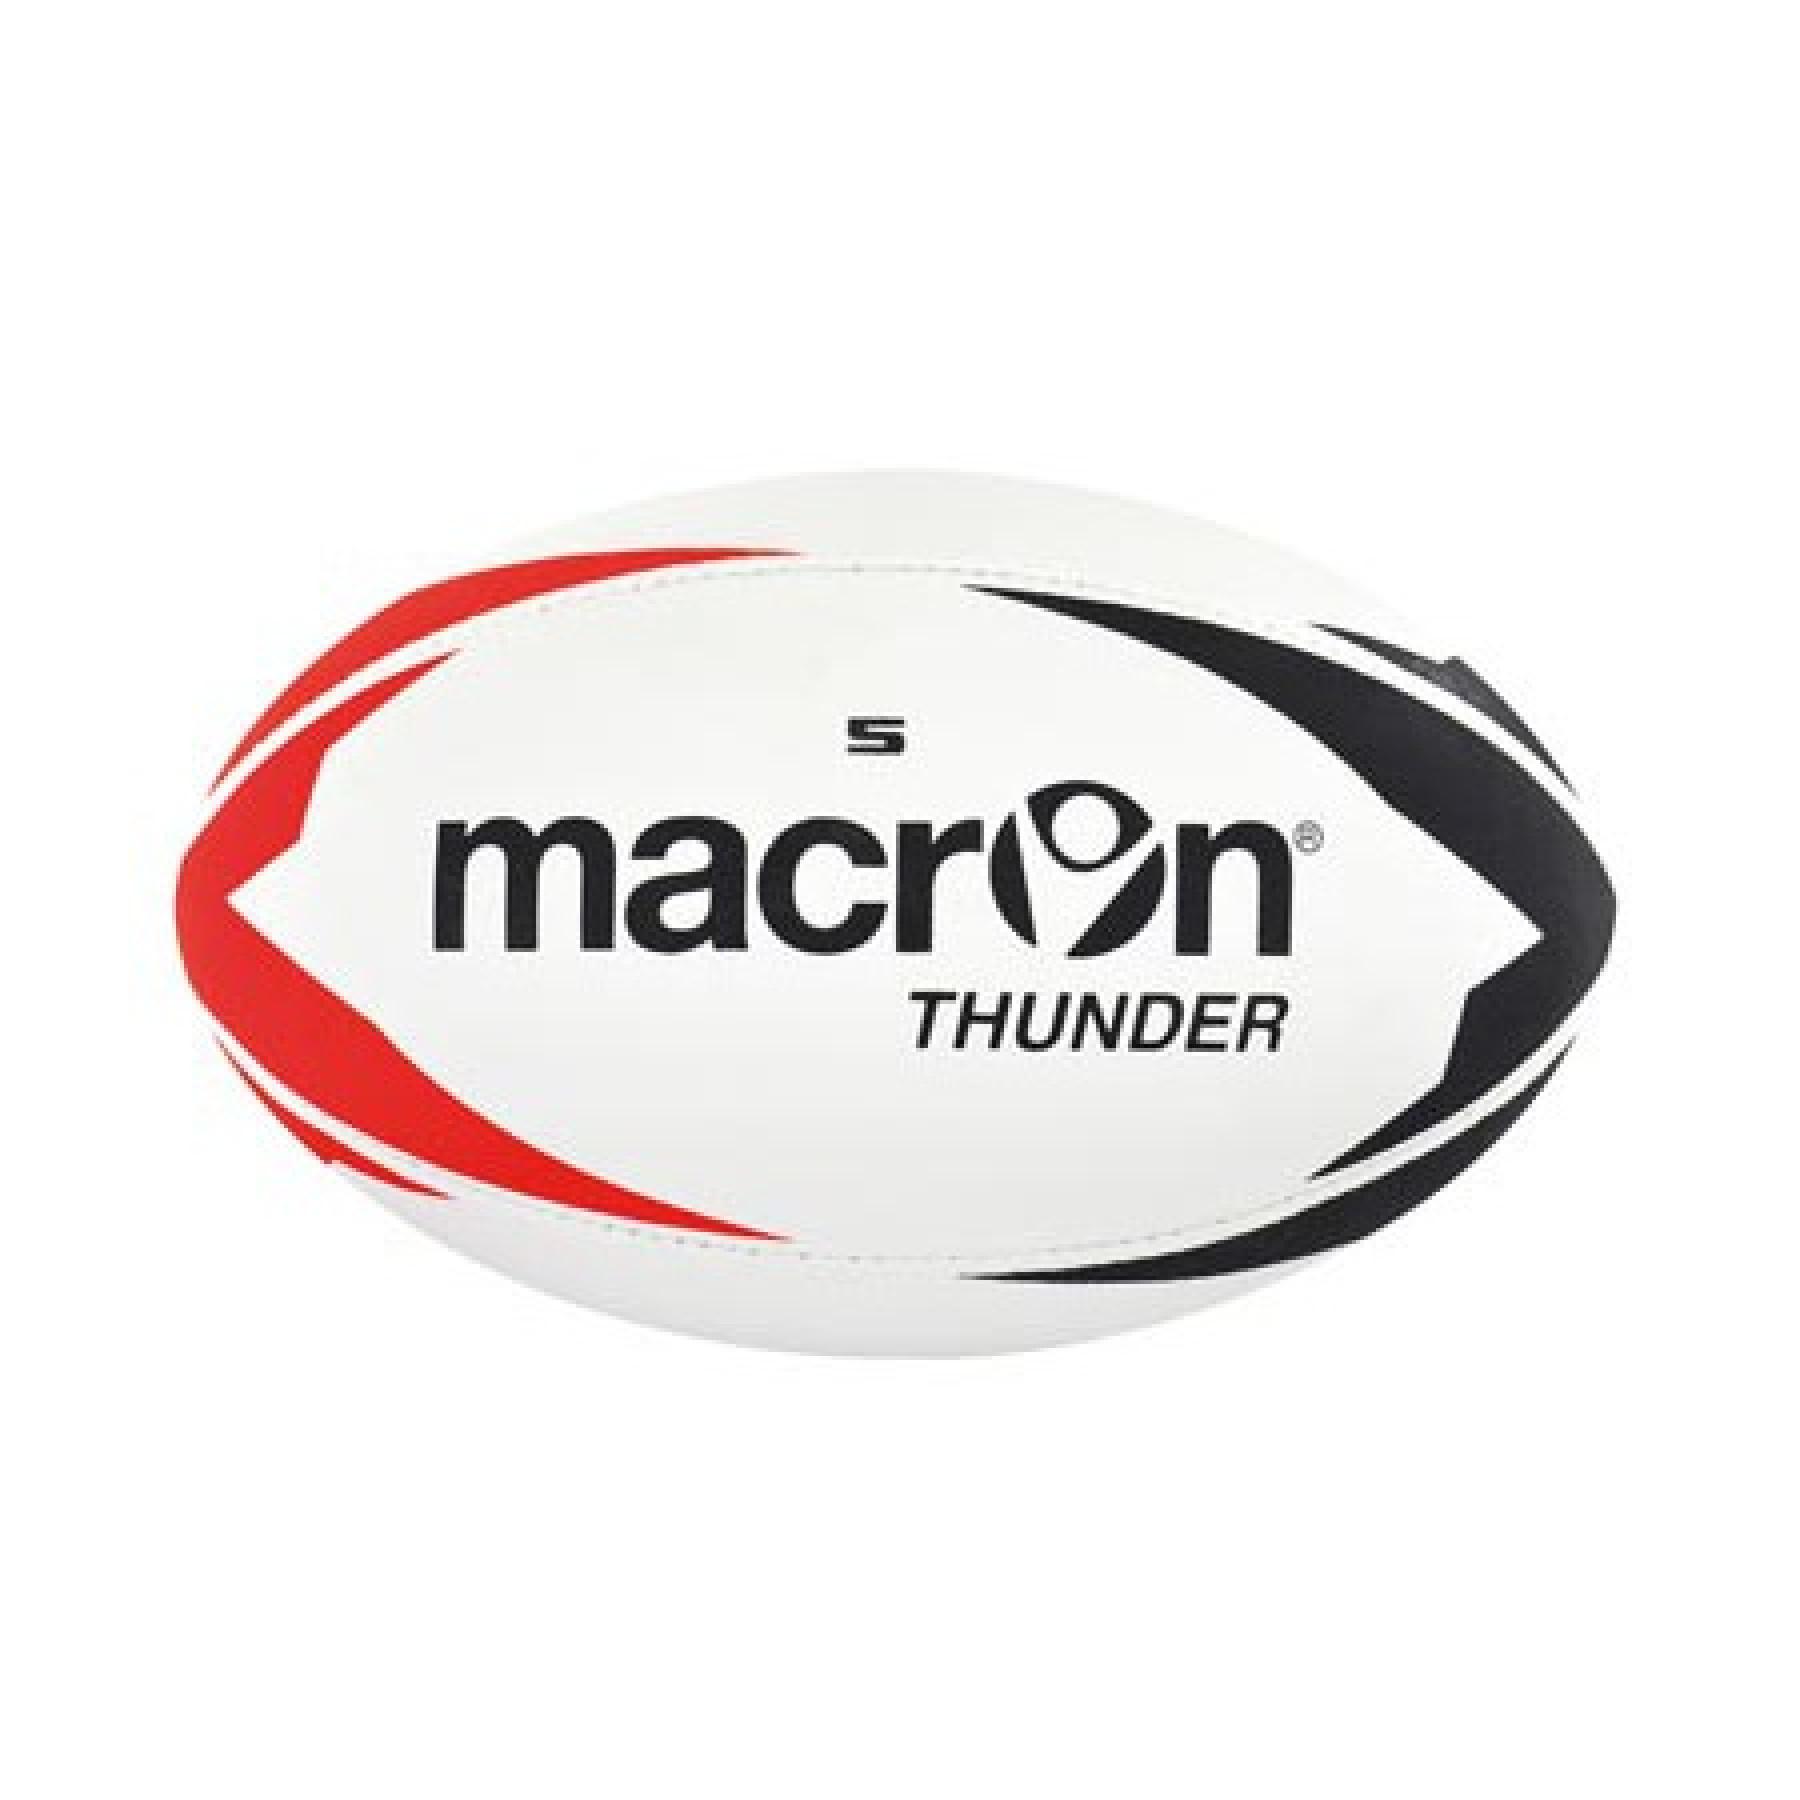 Rugbyball Macron thunder rugby 5